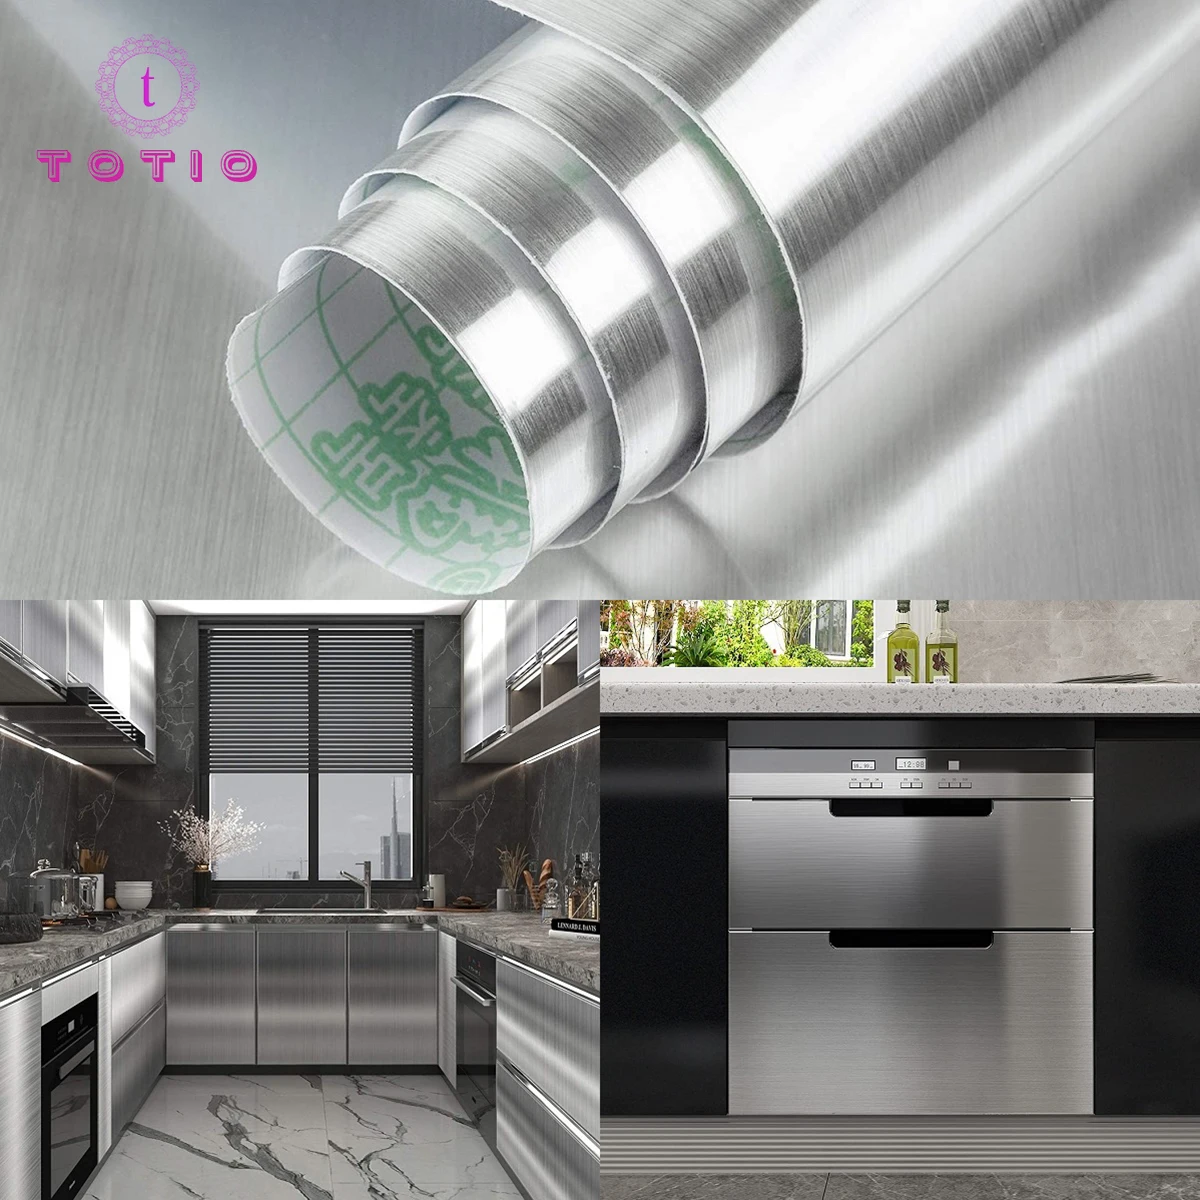 TOTIO Waterproof Silver Wallpaper Self Adhesive Stainless Steel Wallpaper Heat Resistance Vinyl Oilproof House Appliance Kitchen honneycomb technology kitchen sink stainless steel flying waterfall large single soap dispenser house digital display cup washer